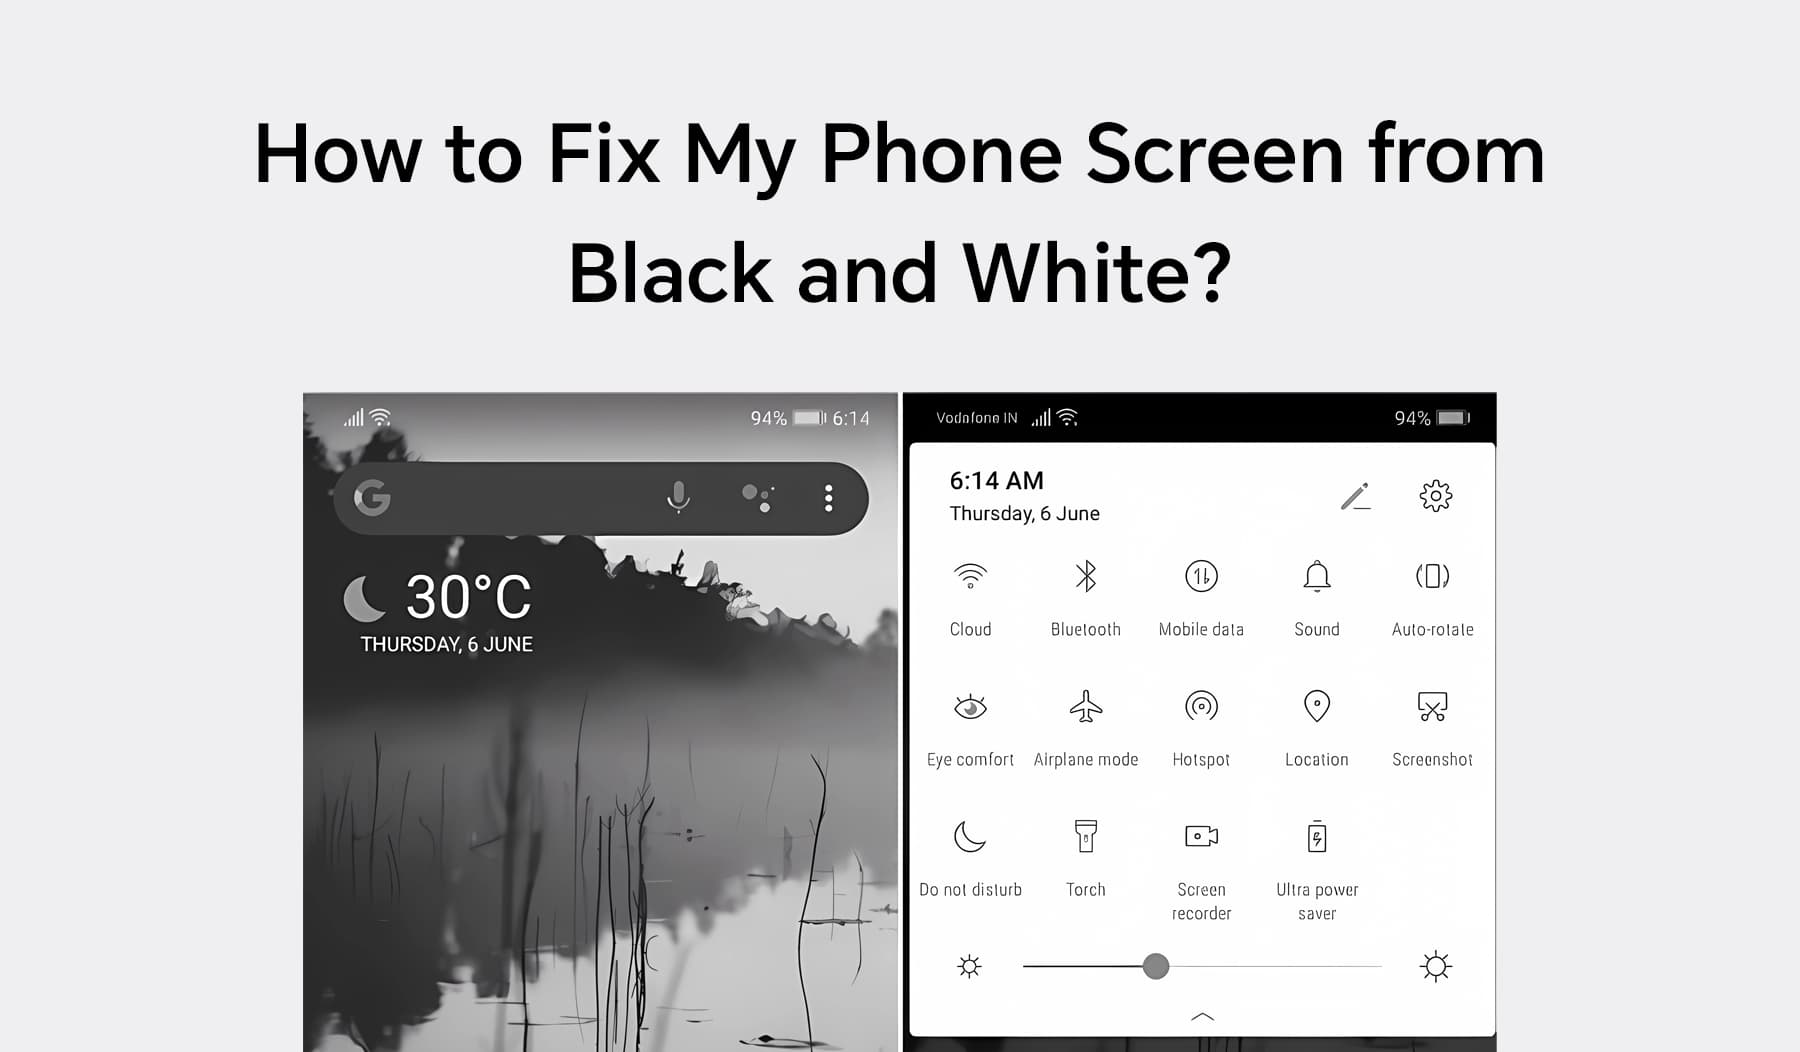 How to Fix My Phone Screen from Black and White